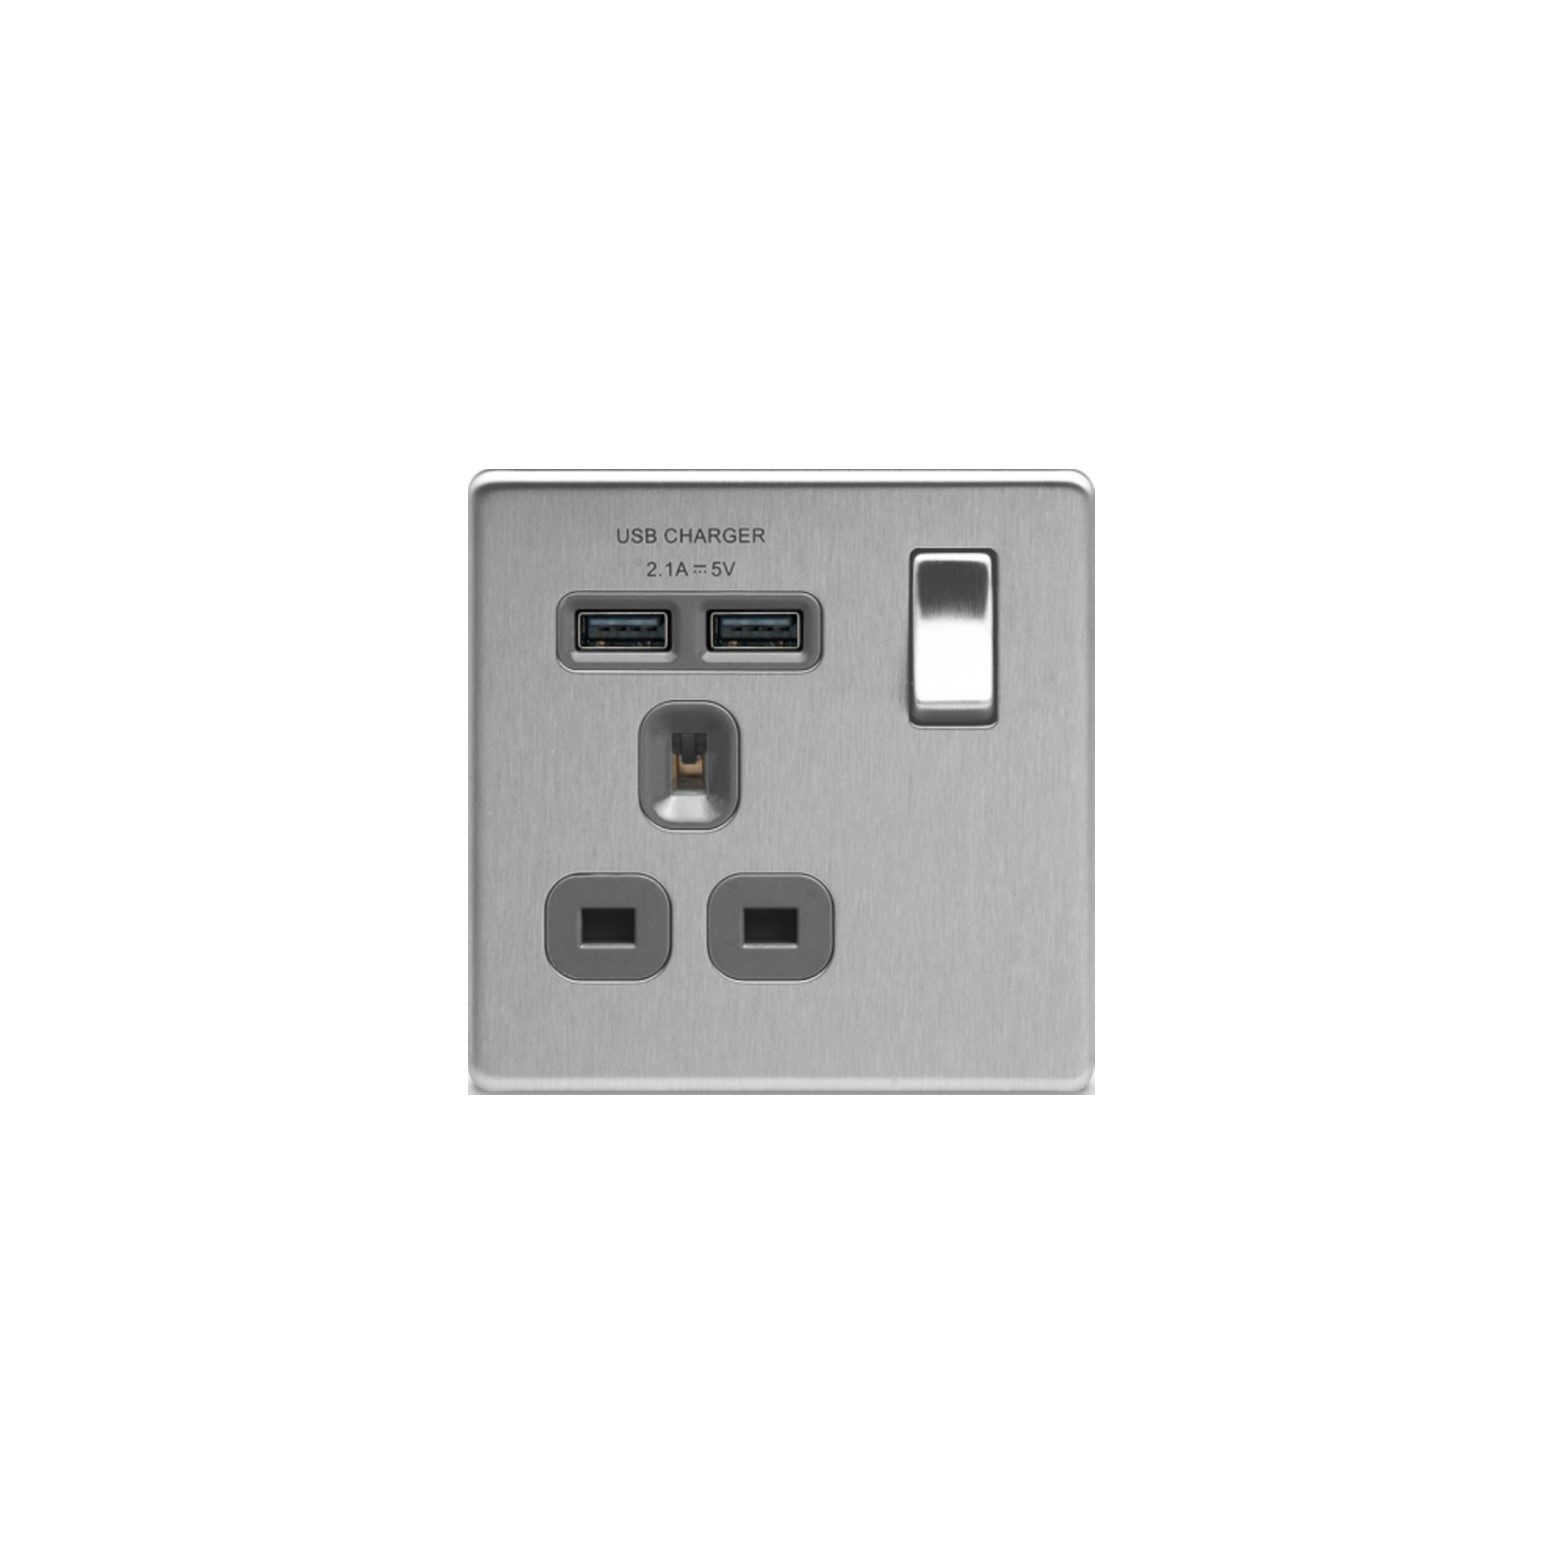 Flatplate Brushed Steel 2USB 2.1A 1-Gang 13A Switched Wall Socket Grey Insert, USB Charger(FBS21U2G)